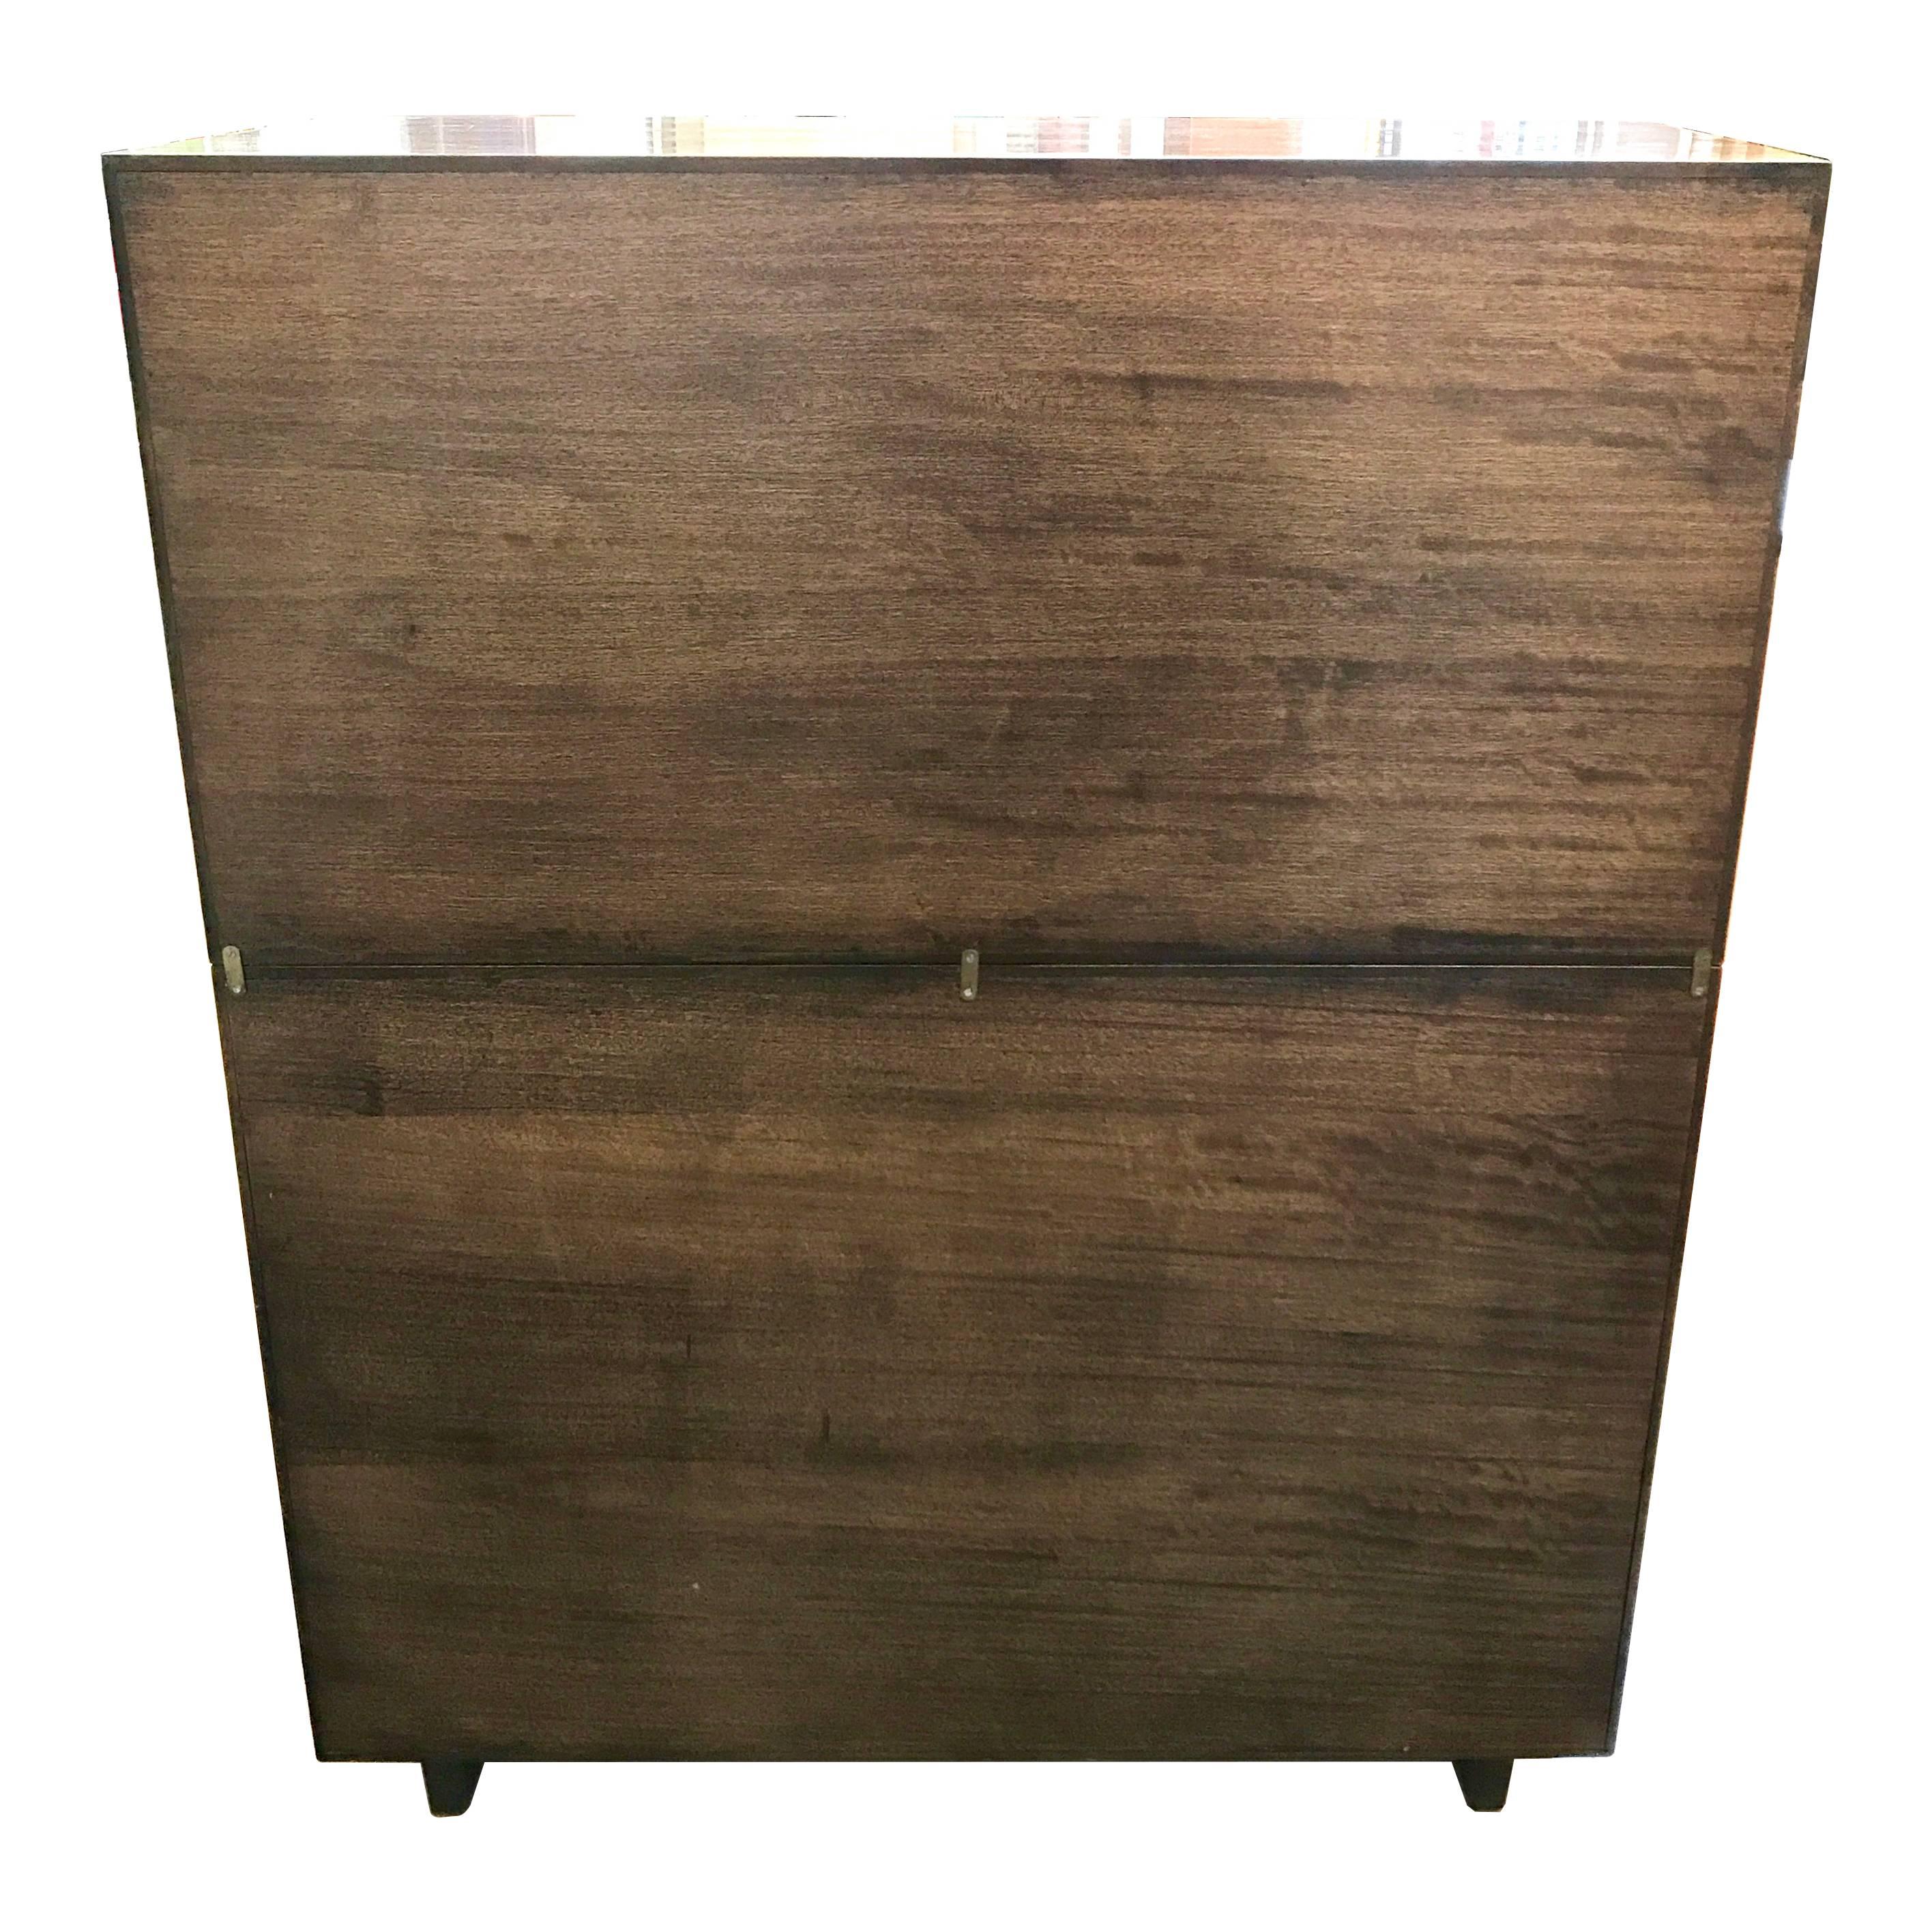 Mid-Century Modern 1950s Milo Baughman for Drexel Perspective Mindoro Wood China Hutch For Sale